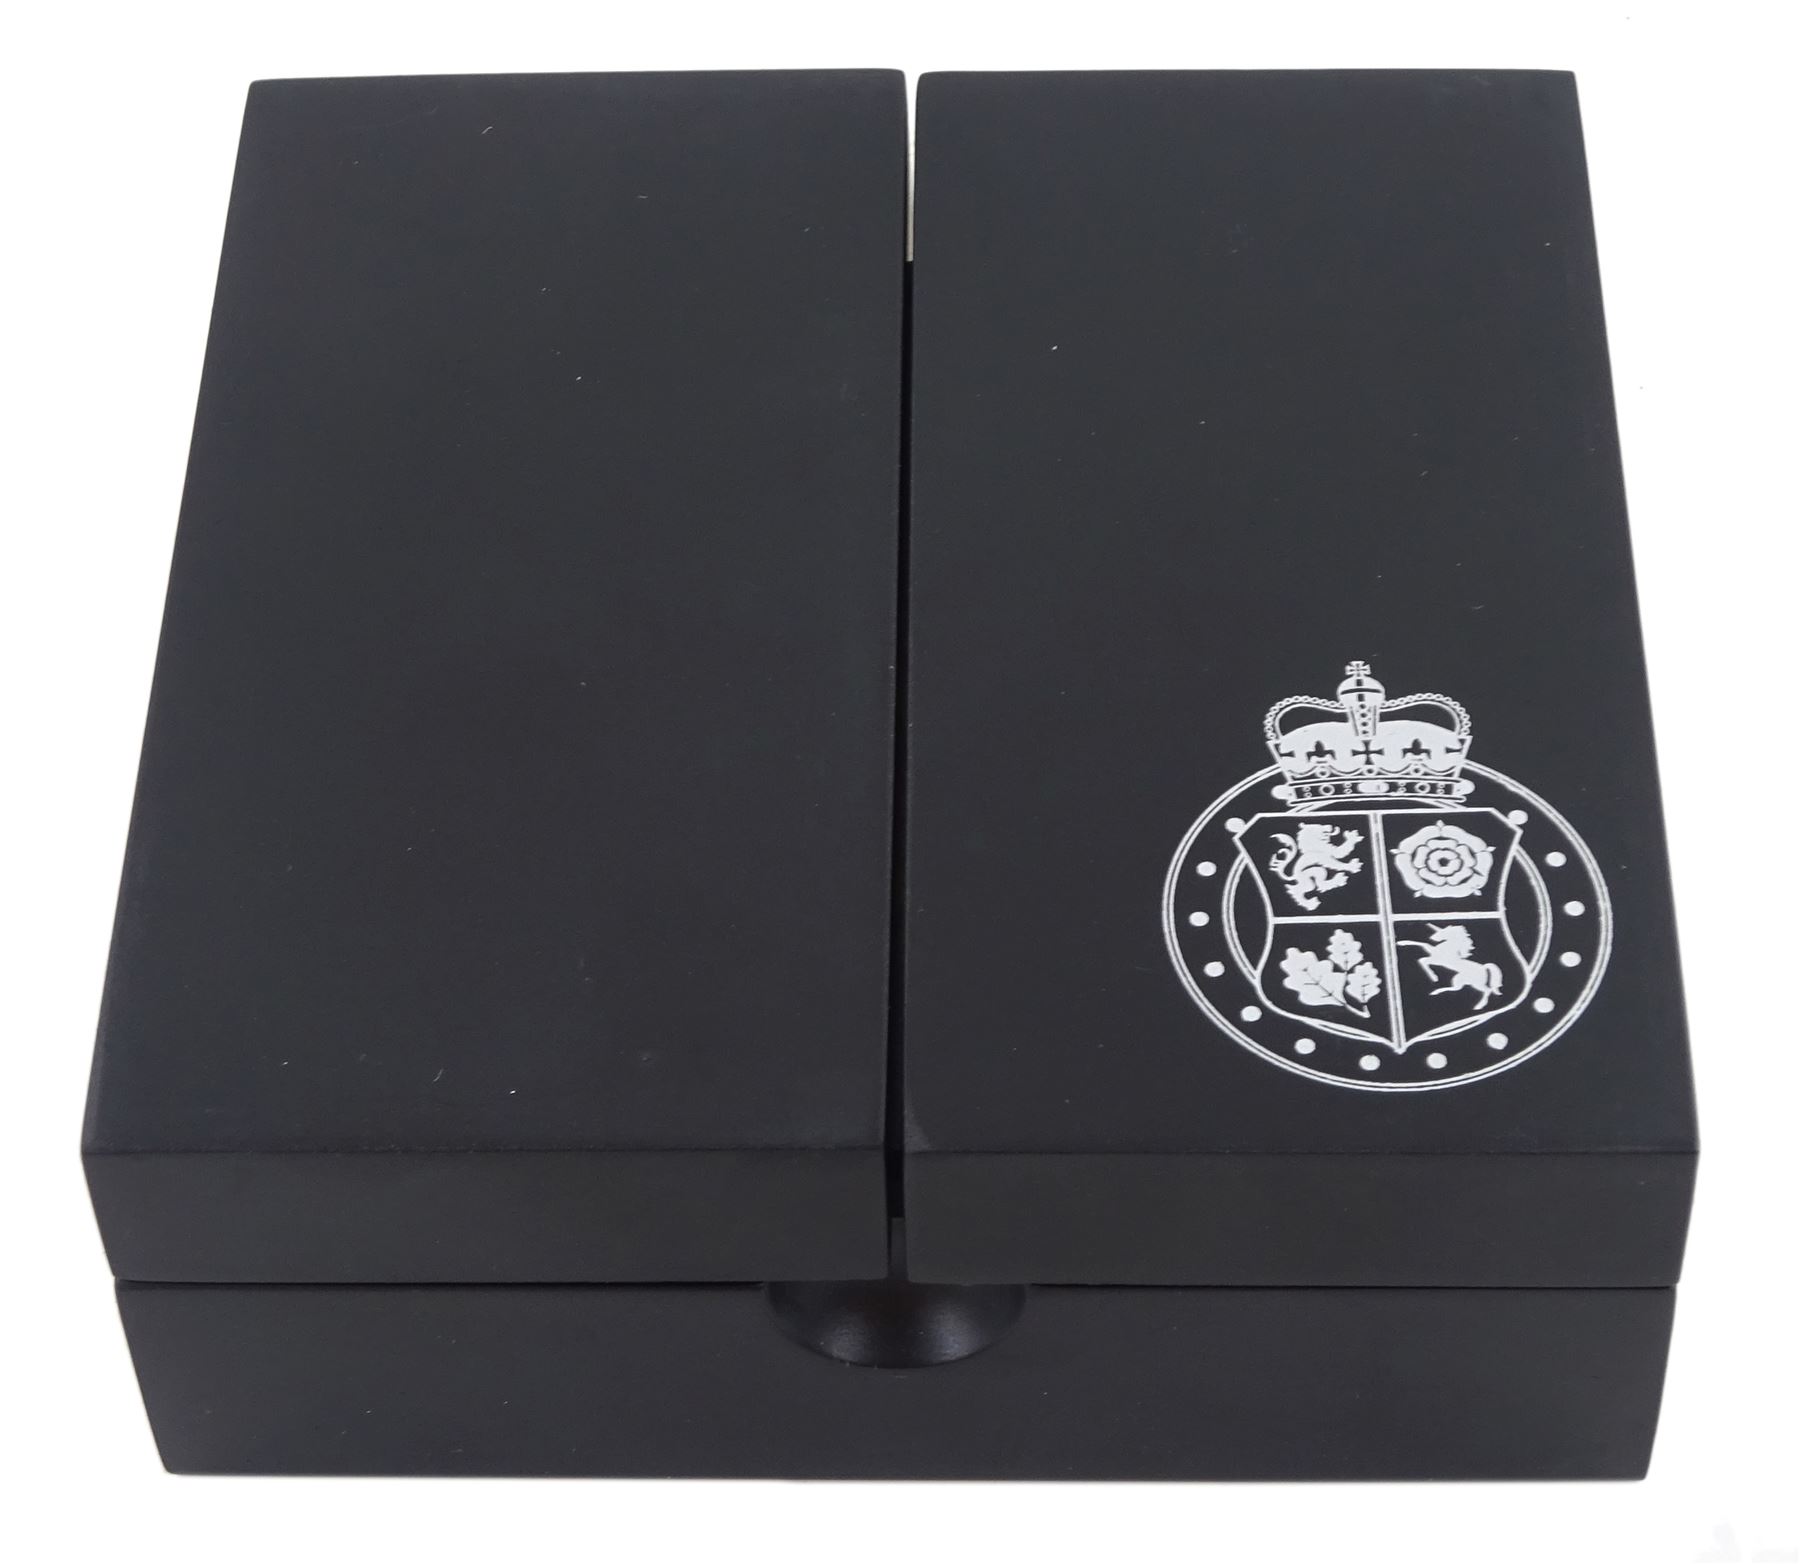 Queen Elizabeth II Guernsey 2020 '75th Anniversary VE Day Victory in Europe' 22ct gold proof five po - Image 4 of 4